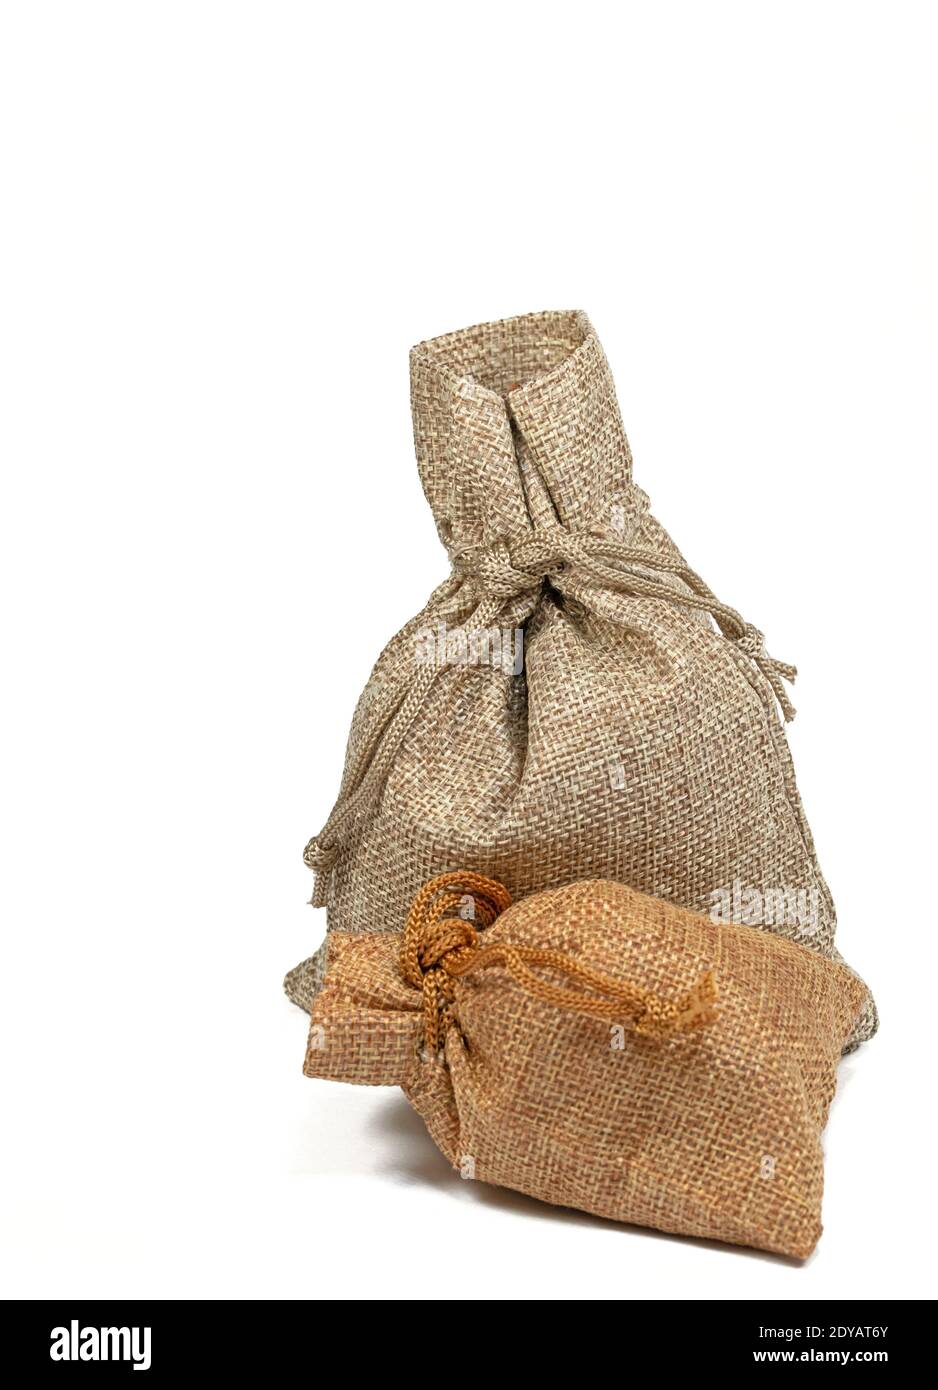 Burlap Party Bags & Containers | Oriental Trading Company